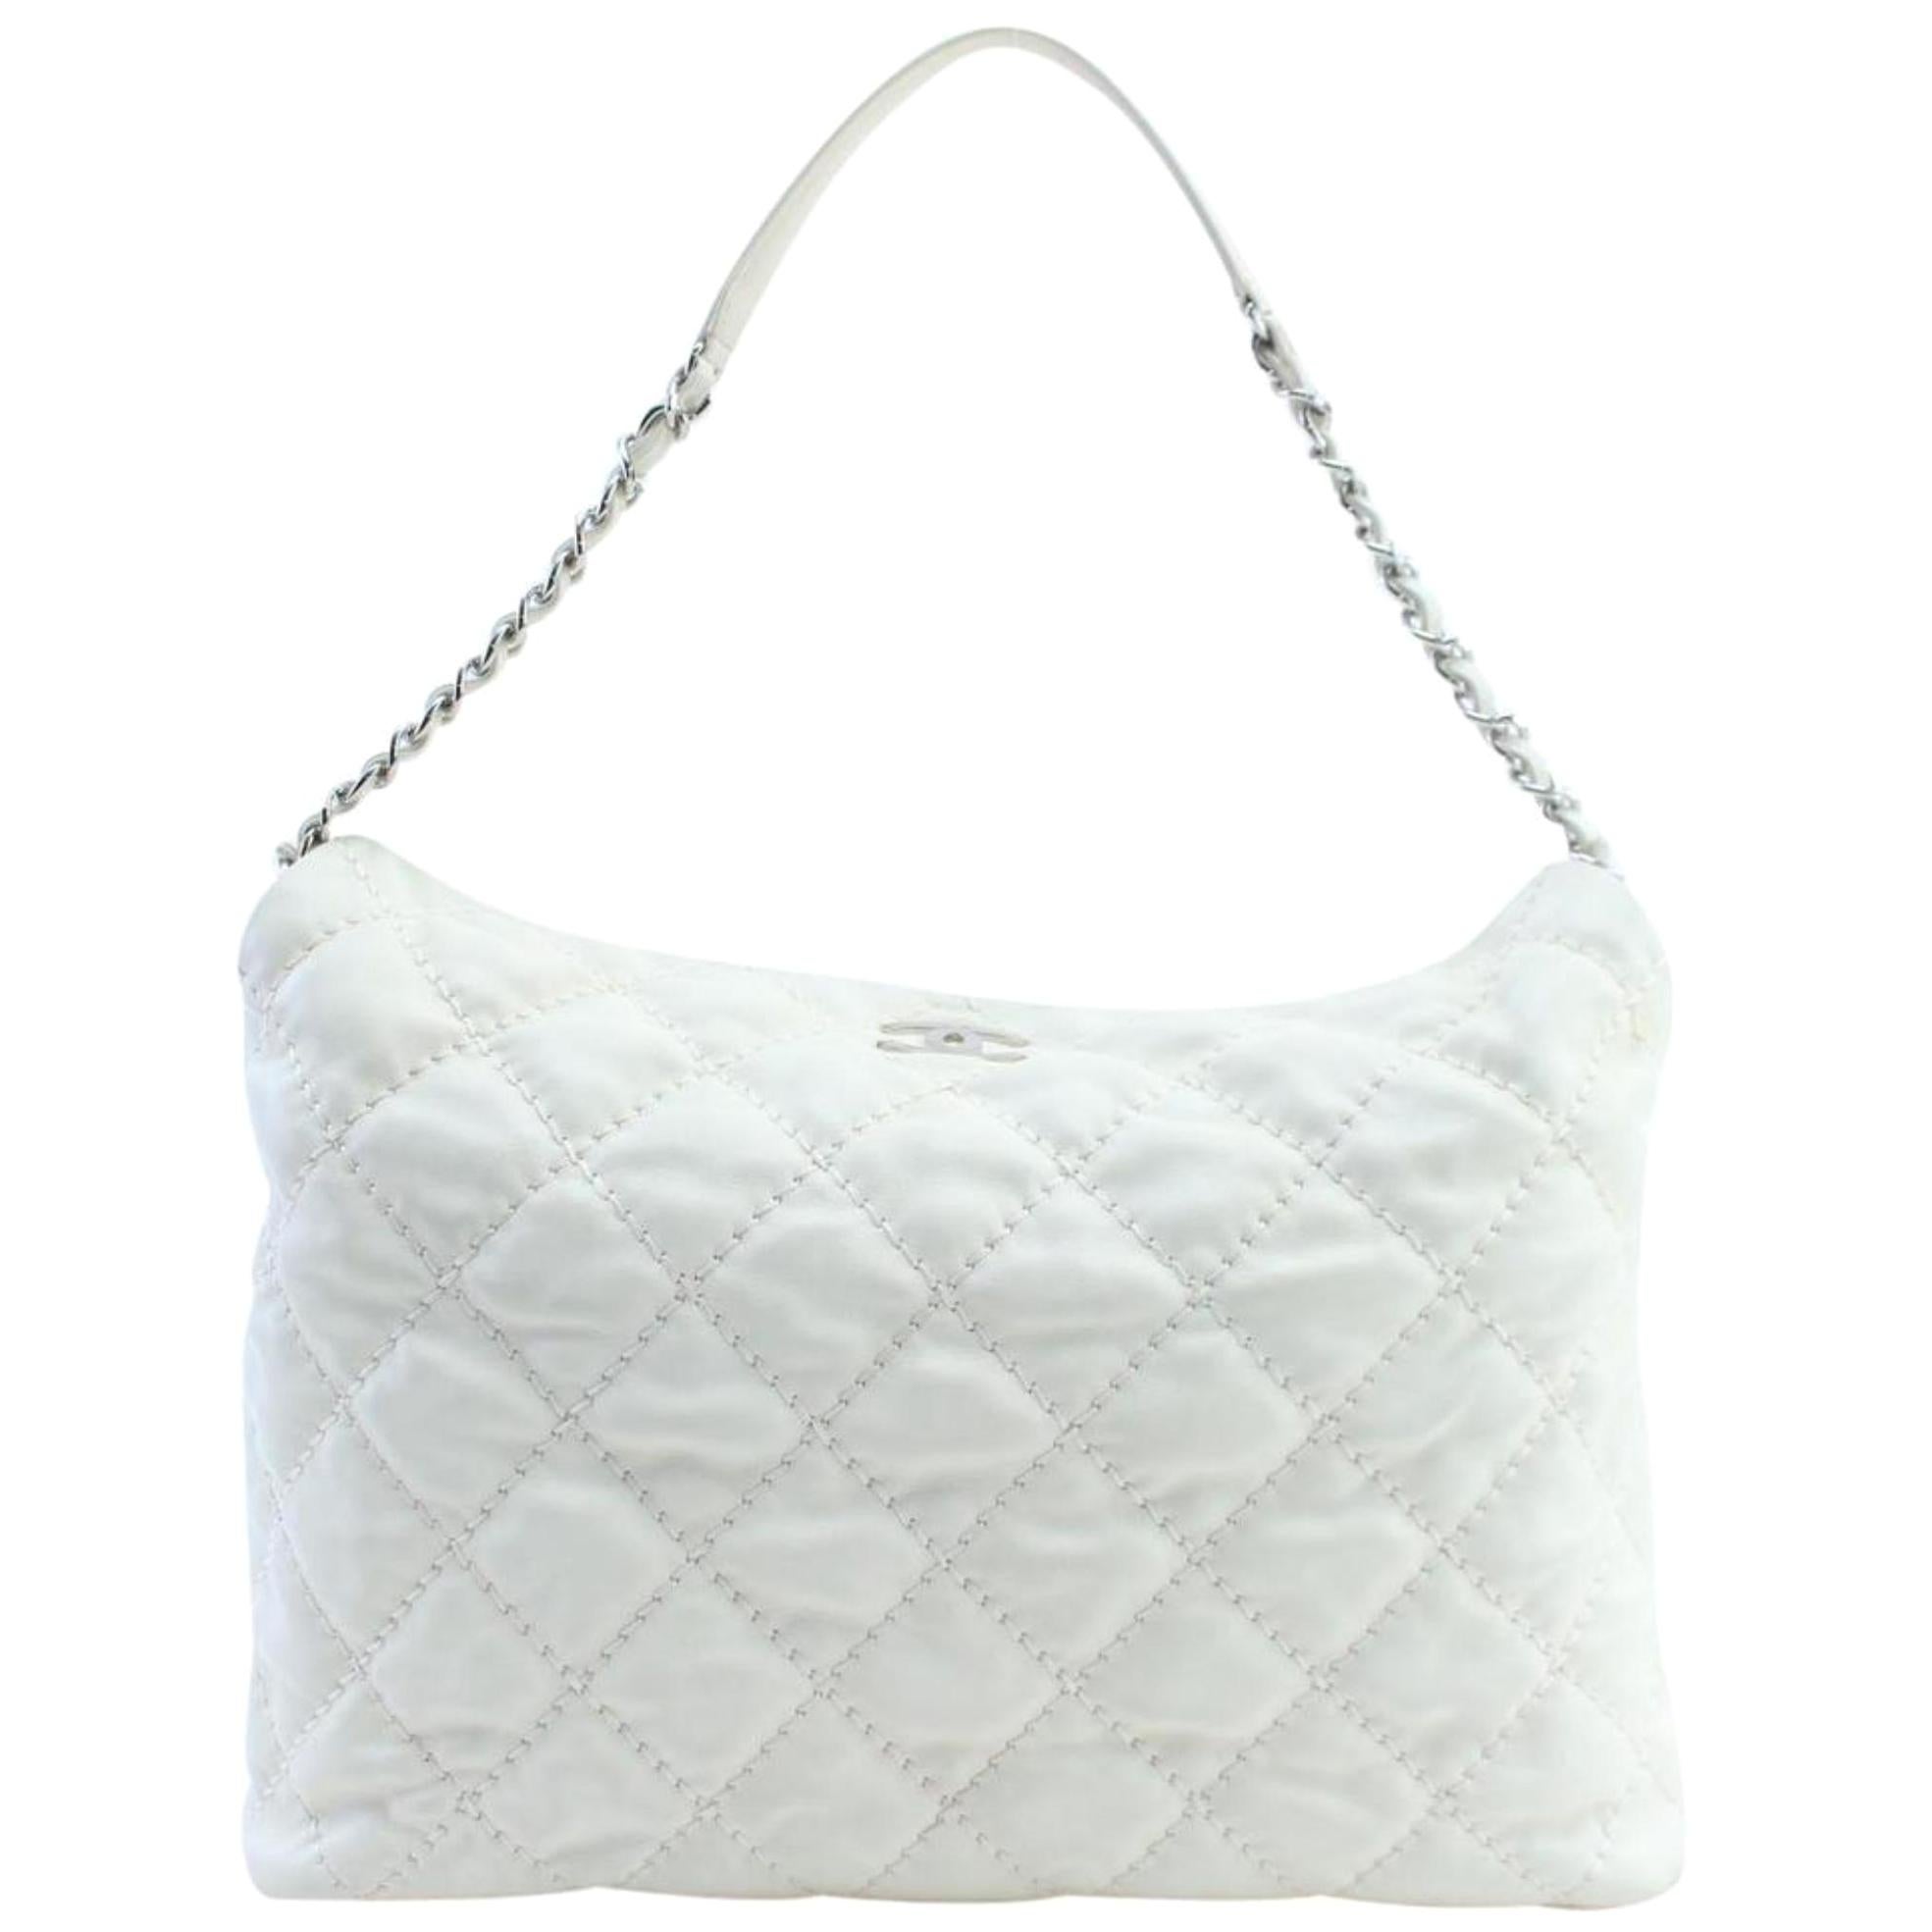 Chanel Hobo French Riviera 13cr0228 Ivory Quilted Leather Shoulder Bag For Sale